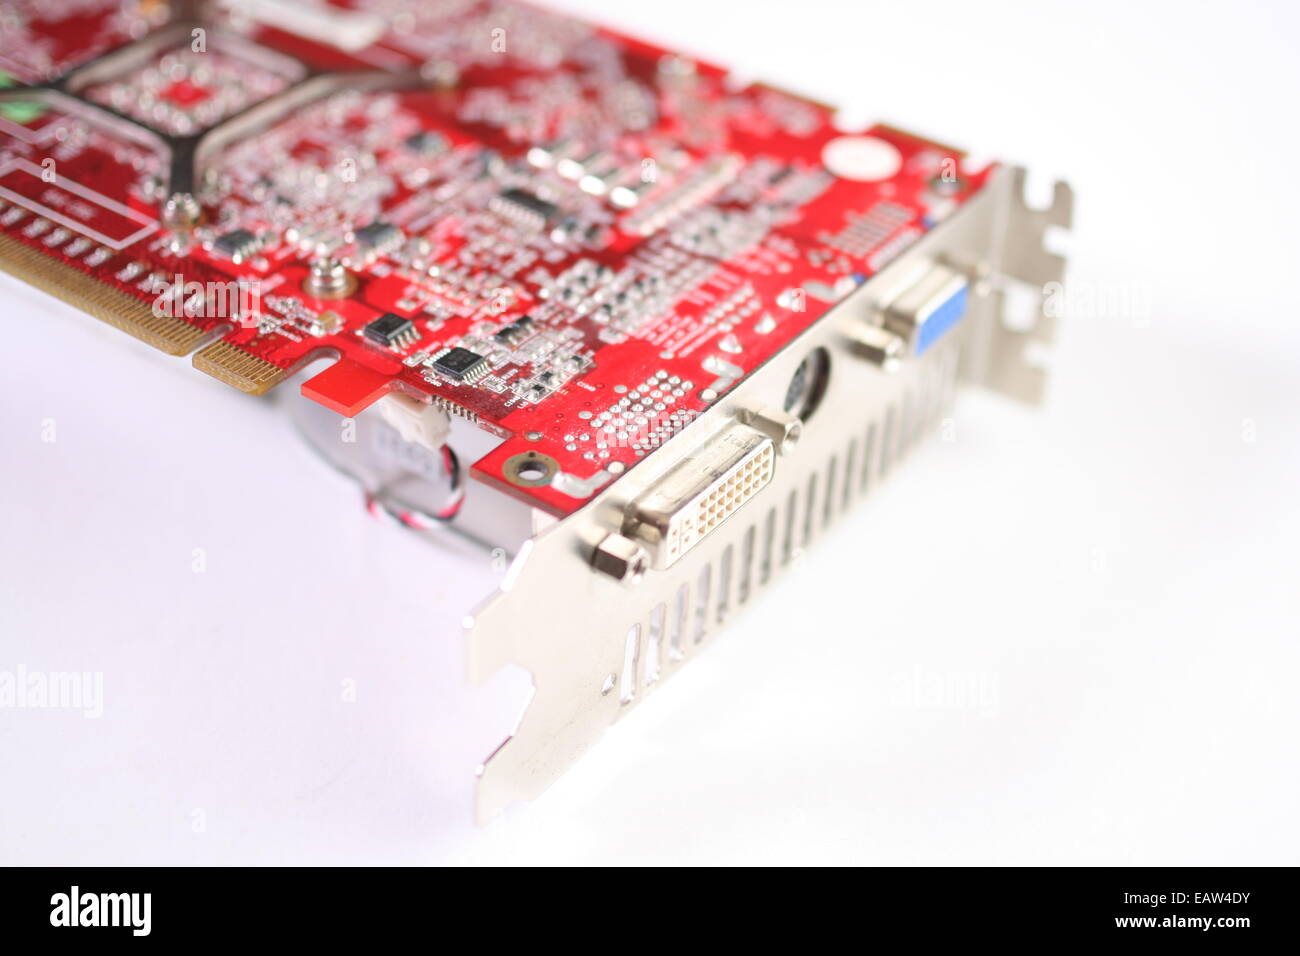 Graphic Video Card with electrical components Stock Photo